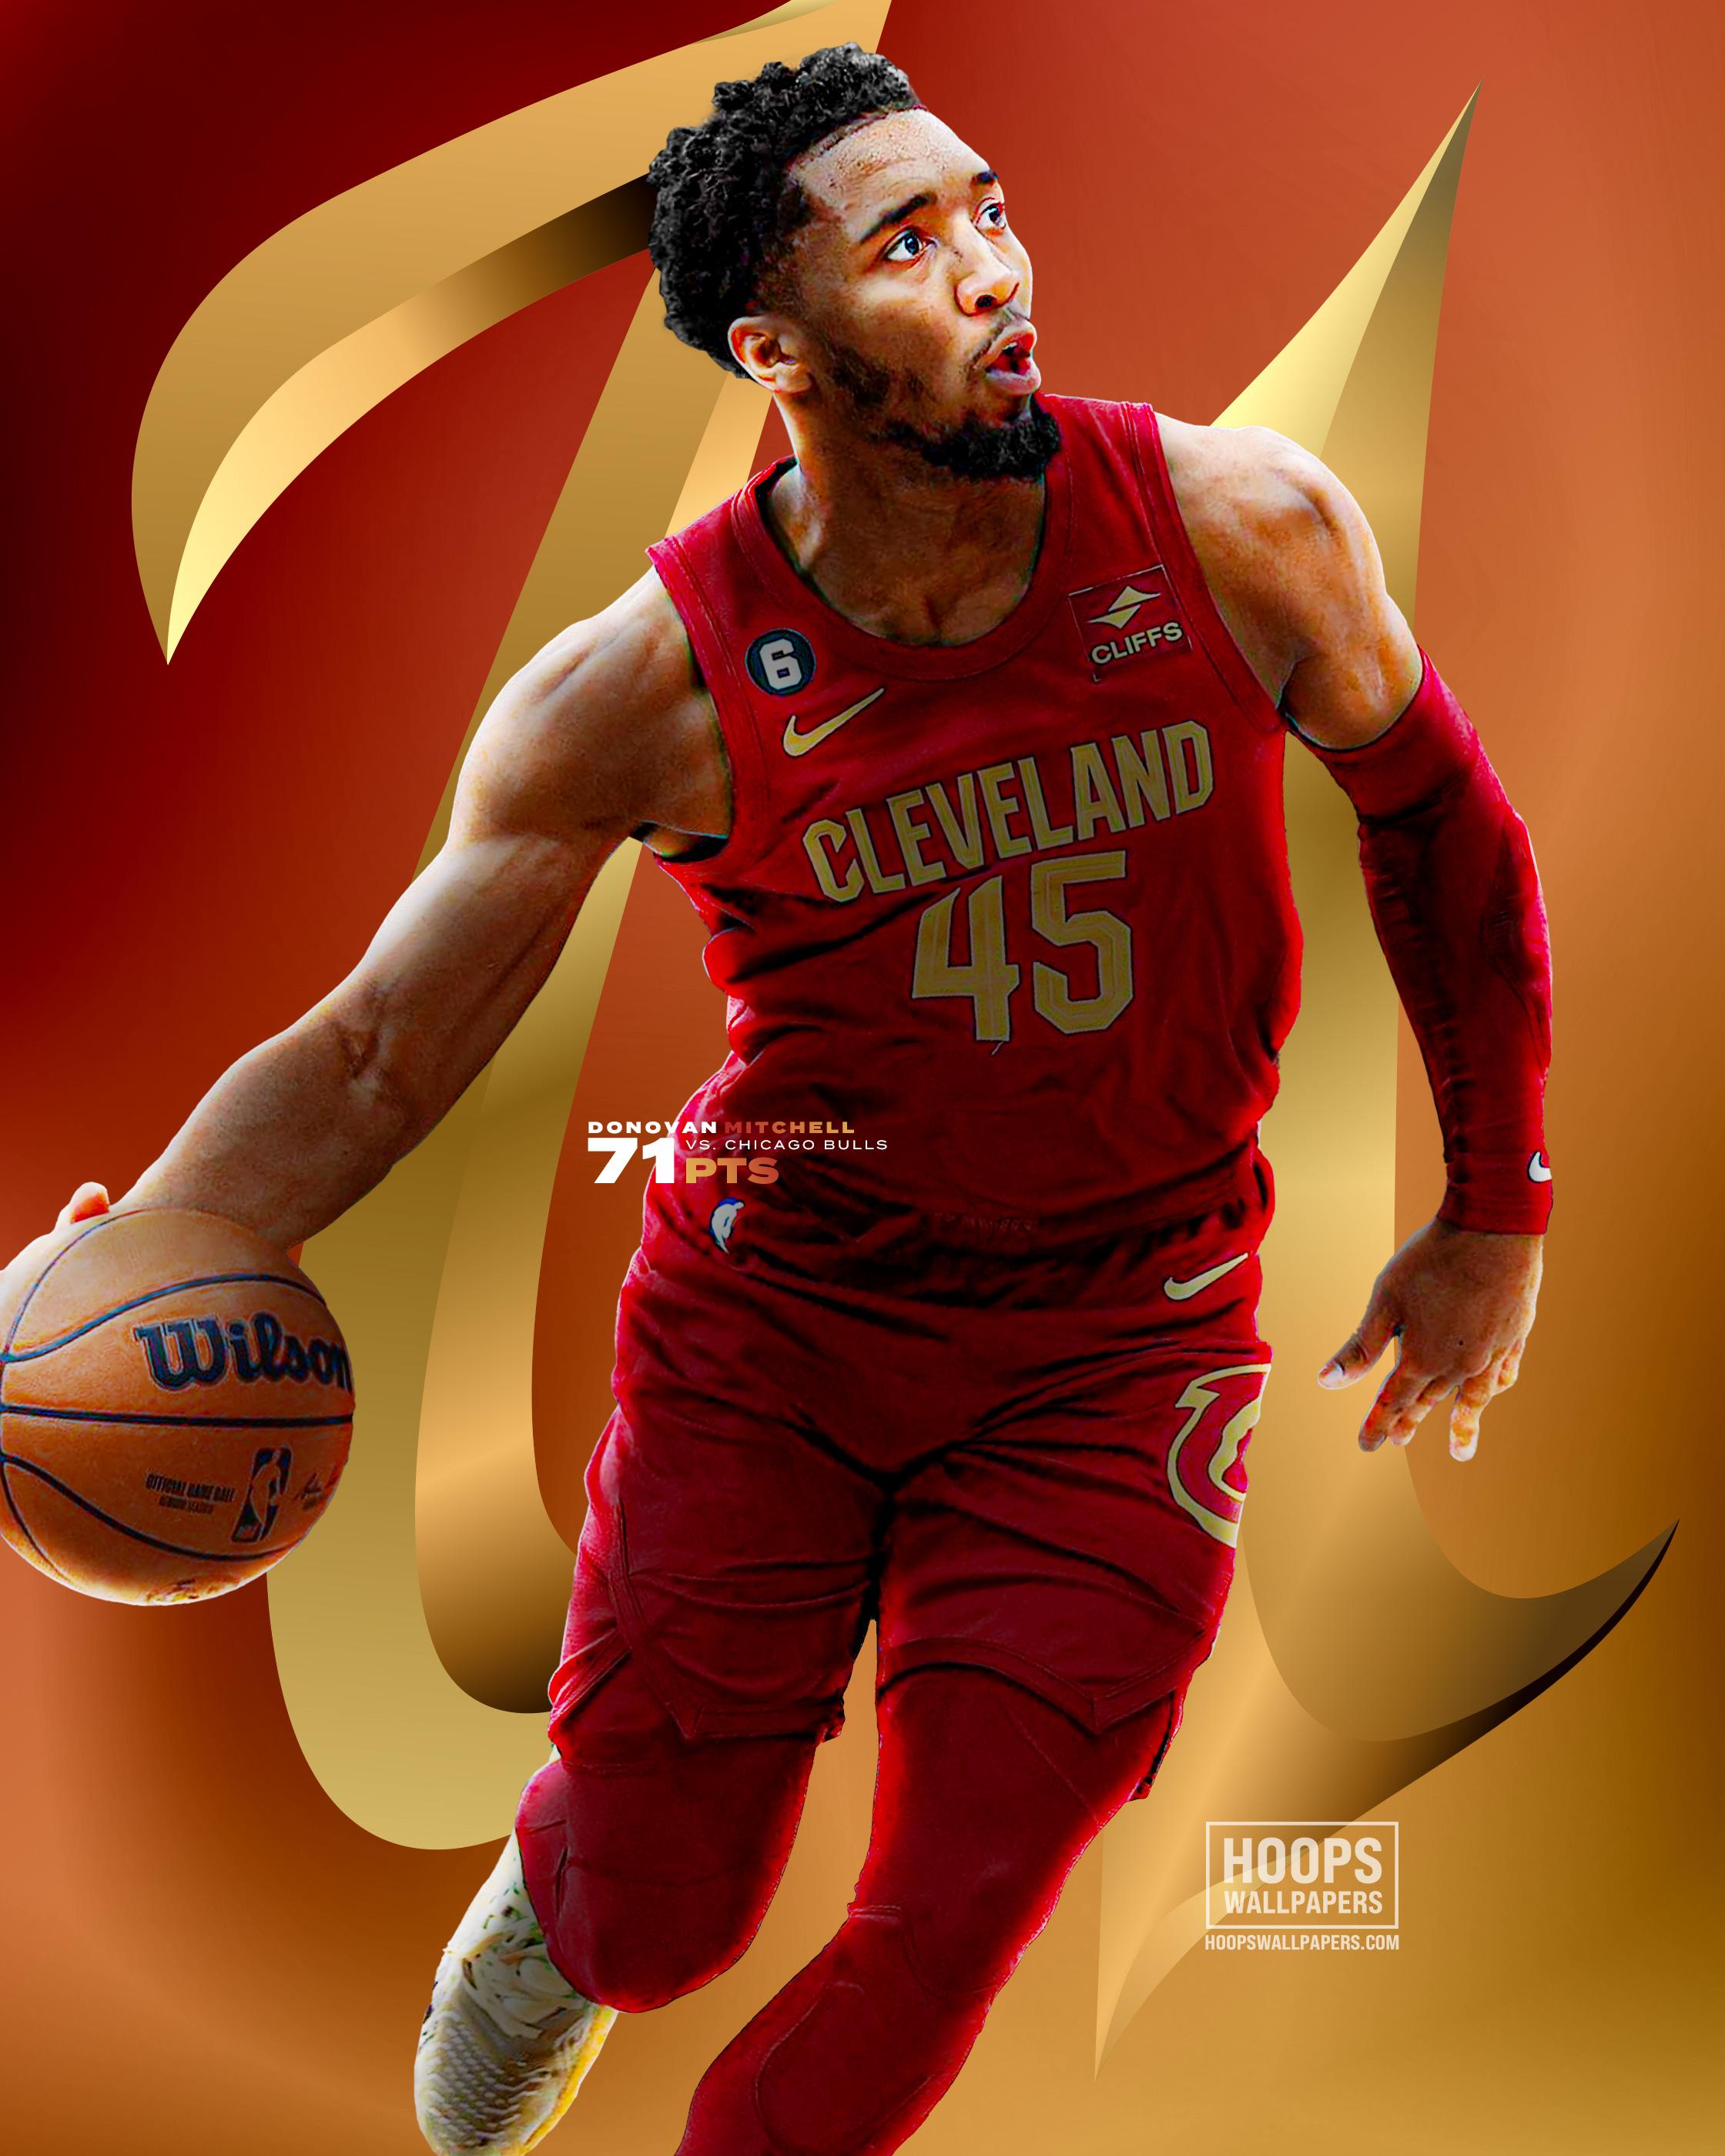 HoopsWallpaperscom Get the latest HD and mobile NBA wallpapers